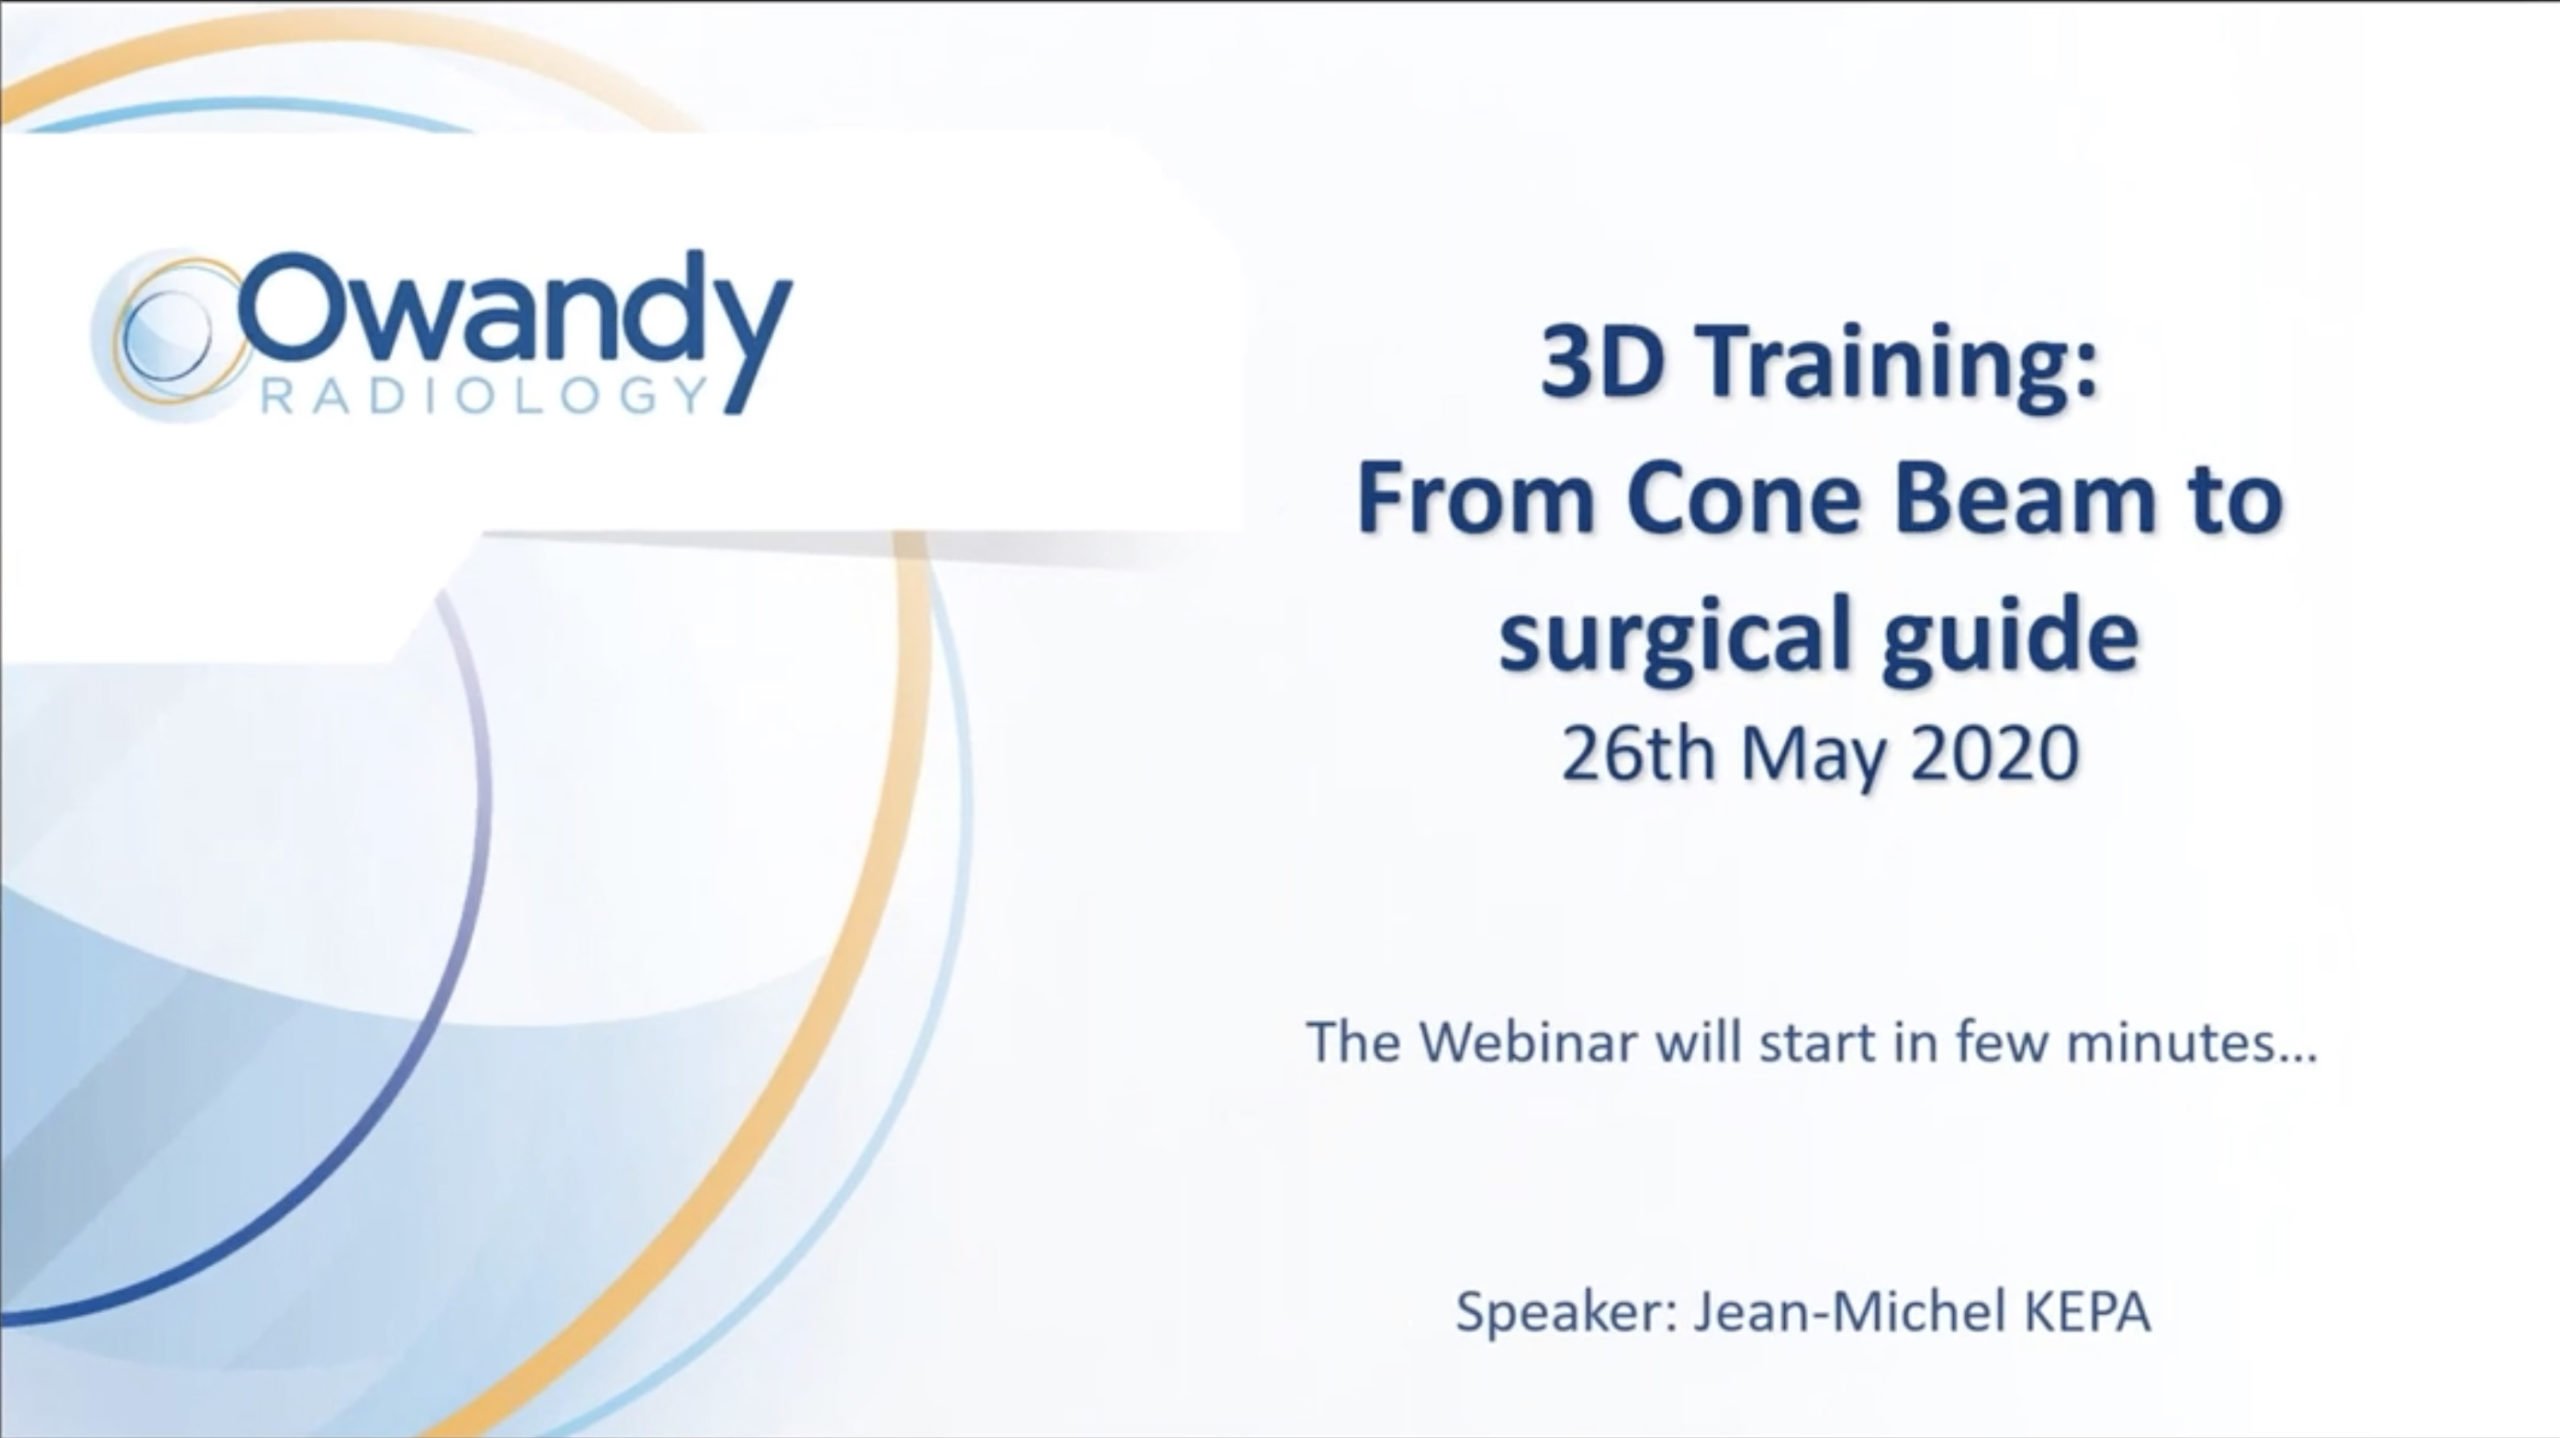 3D Training From cone beam to surgical guide